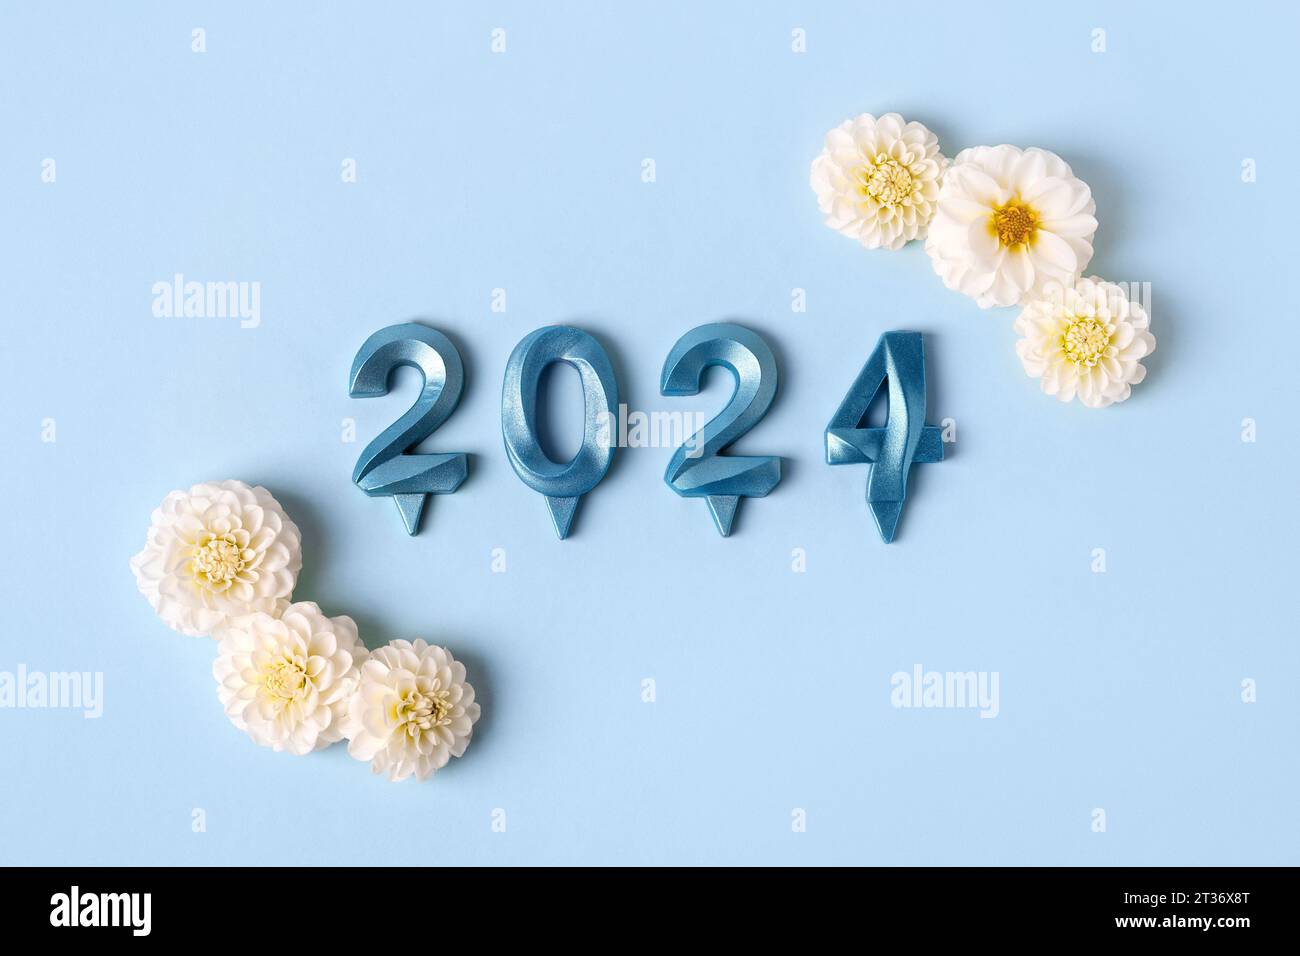 Bright blue numbers and white dahlia flowers on a blue background. 2024 new year idea concept. Simple and clean design Happy New Year 2024 and Merry C Stock Photo